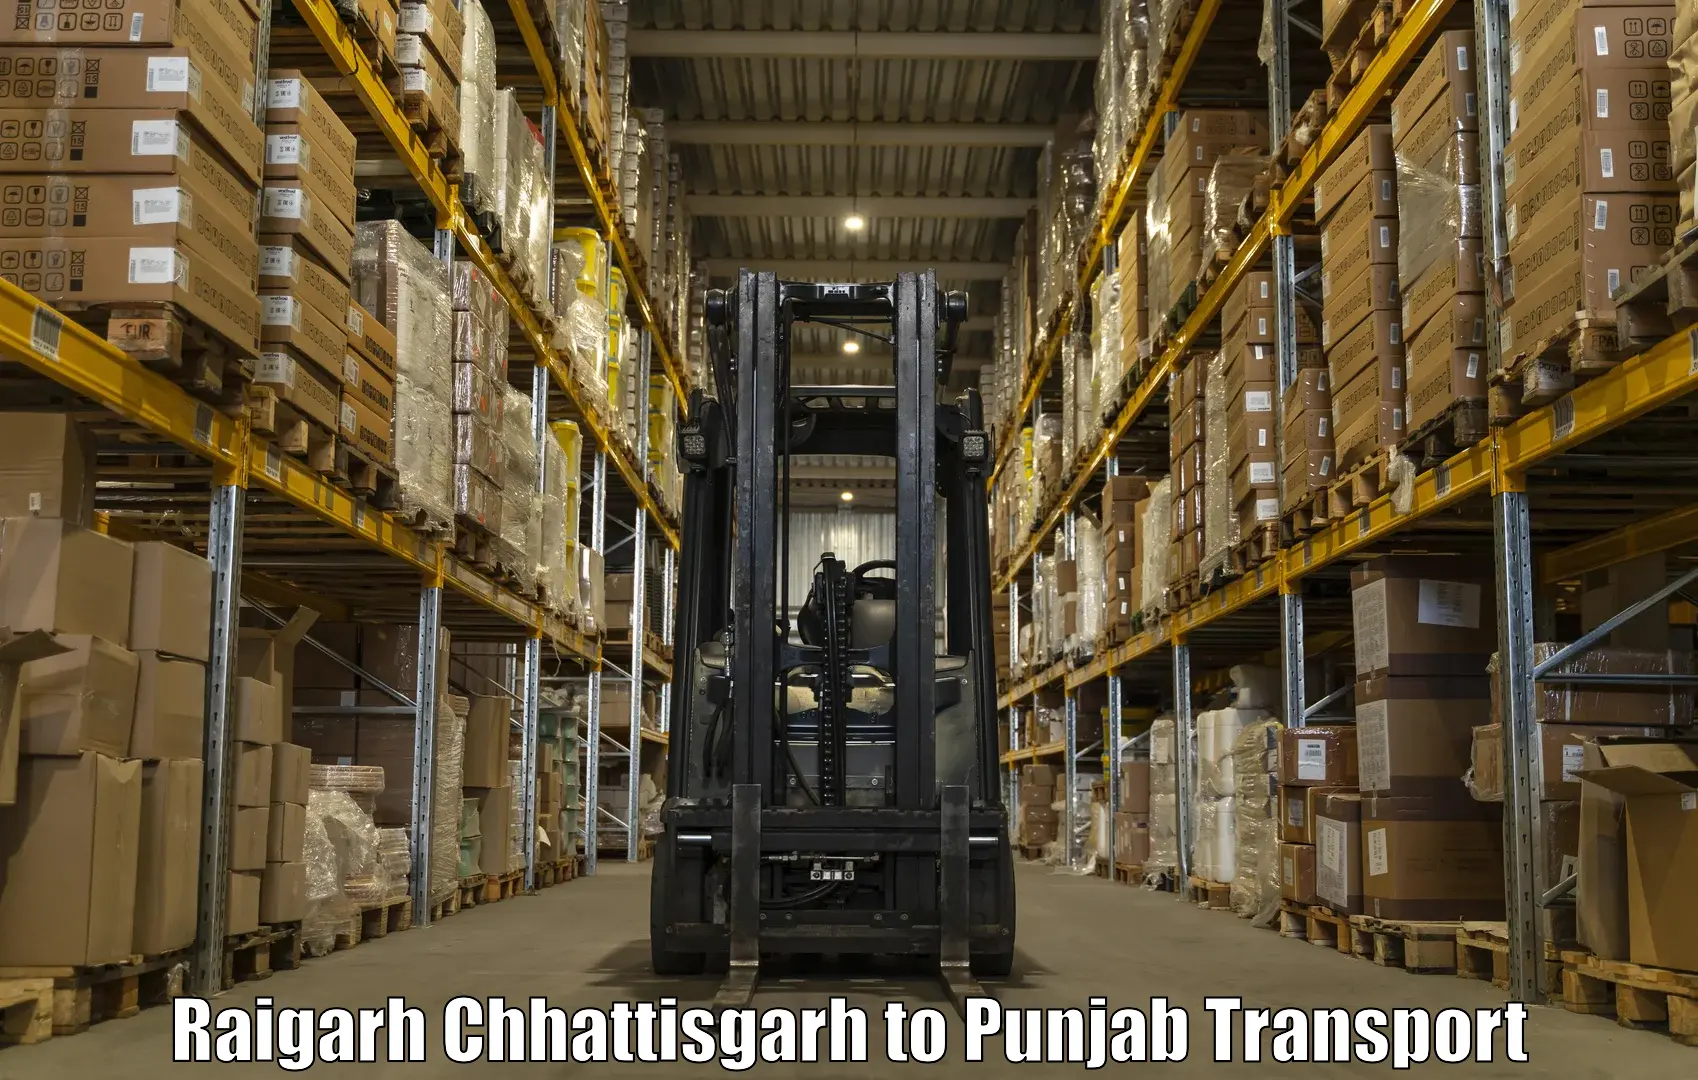 Package delivery services Raigarh Chhattisgarh to Patiala